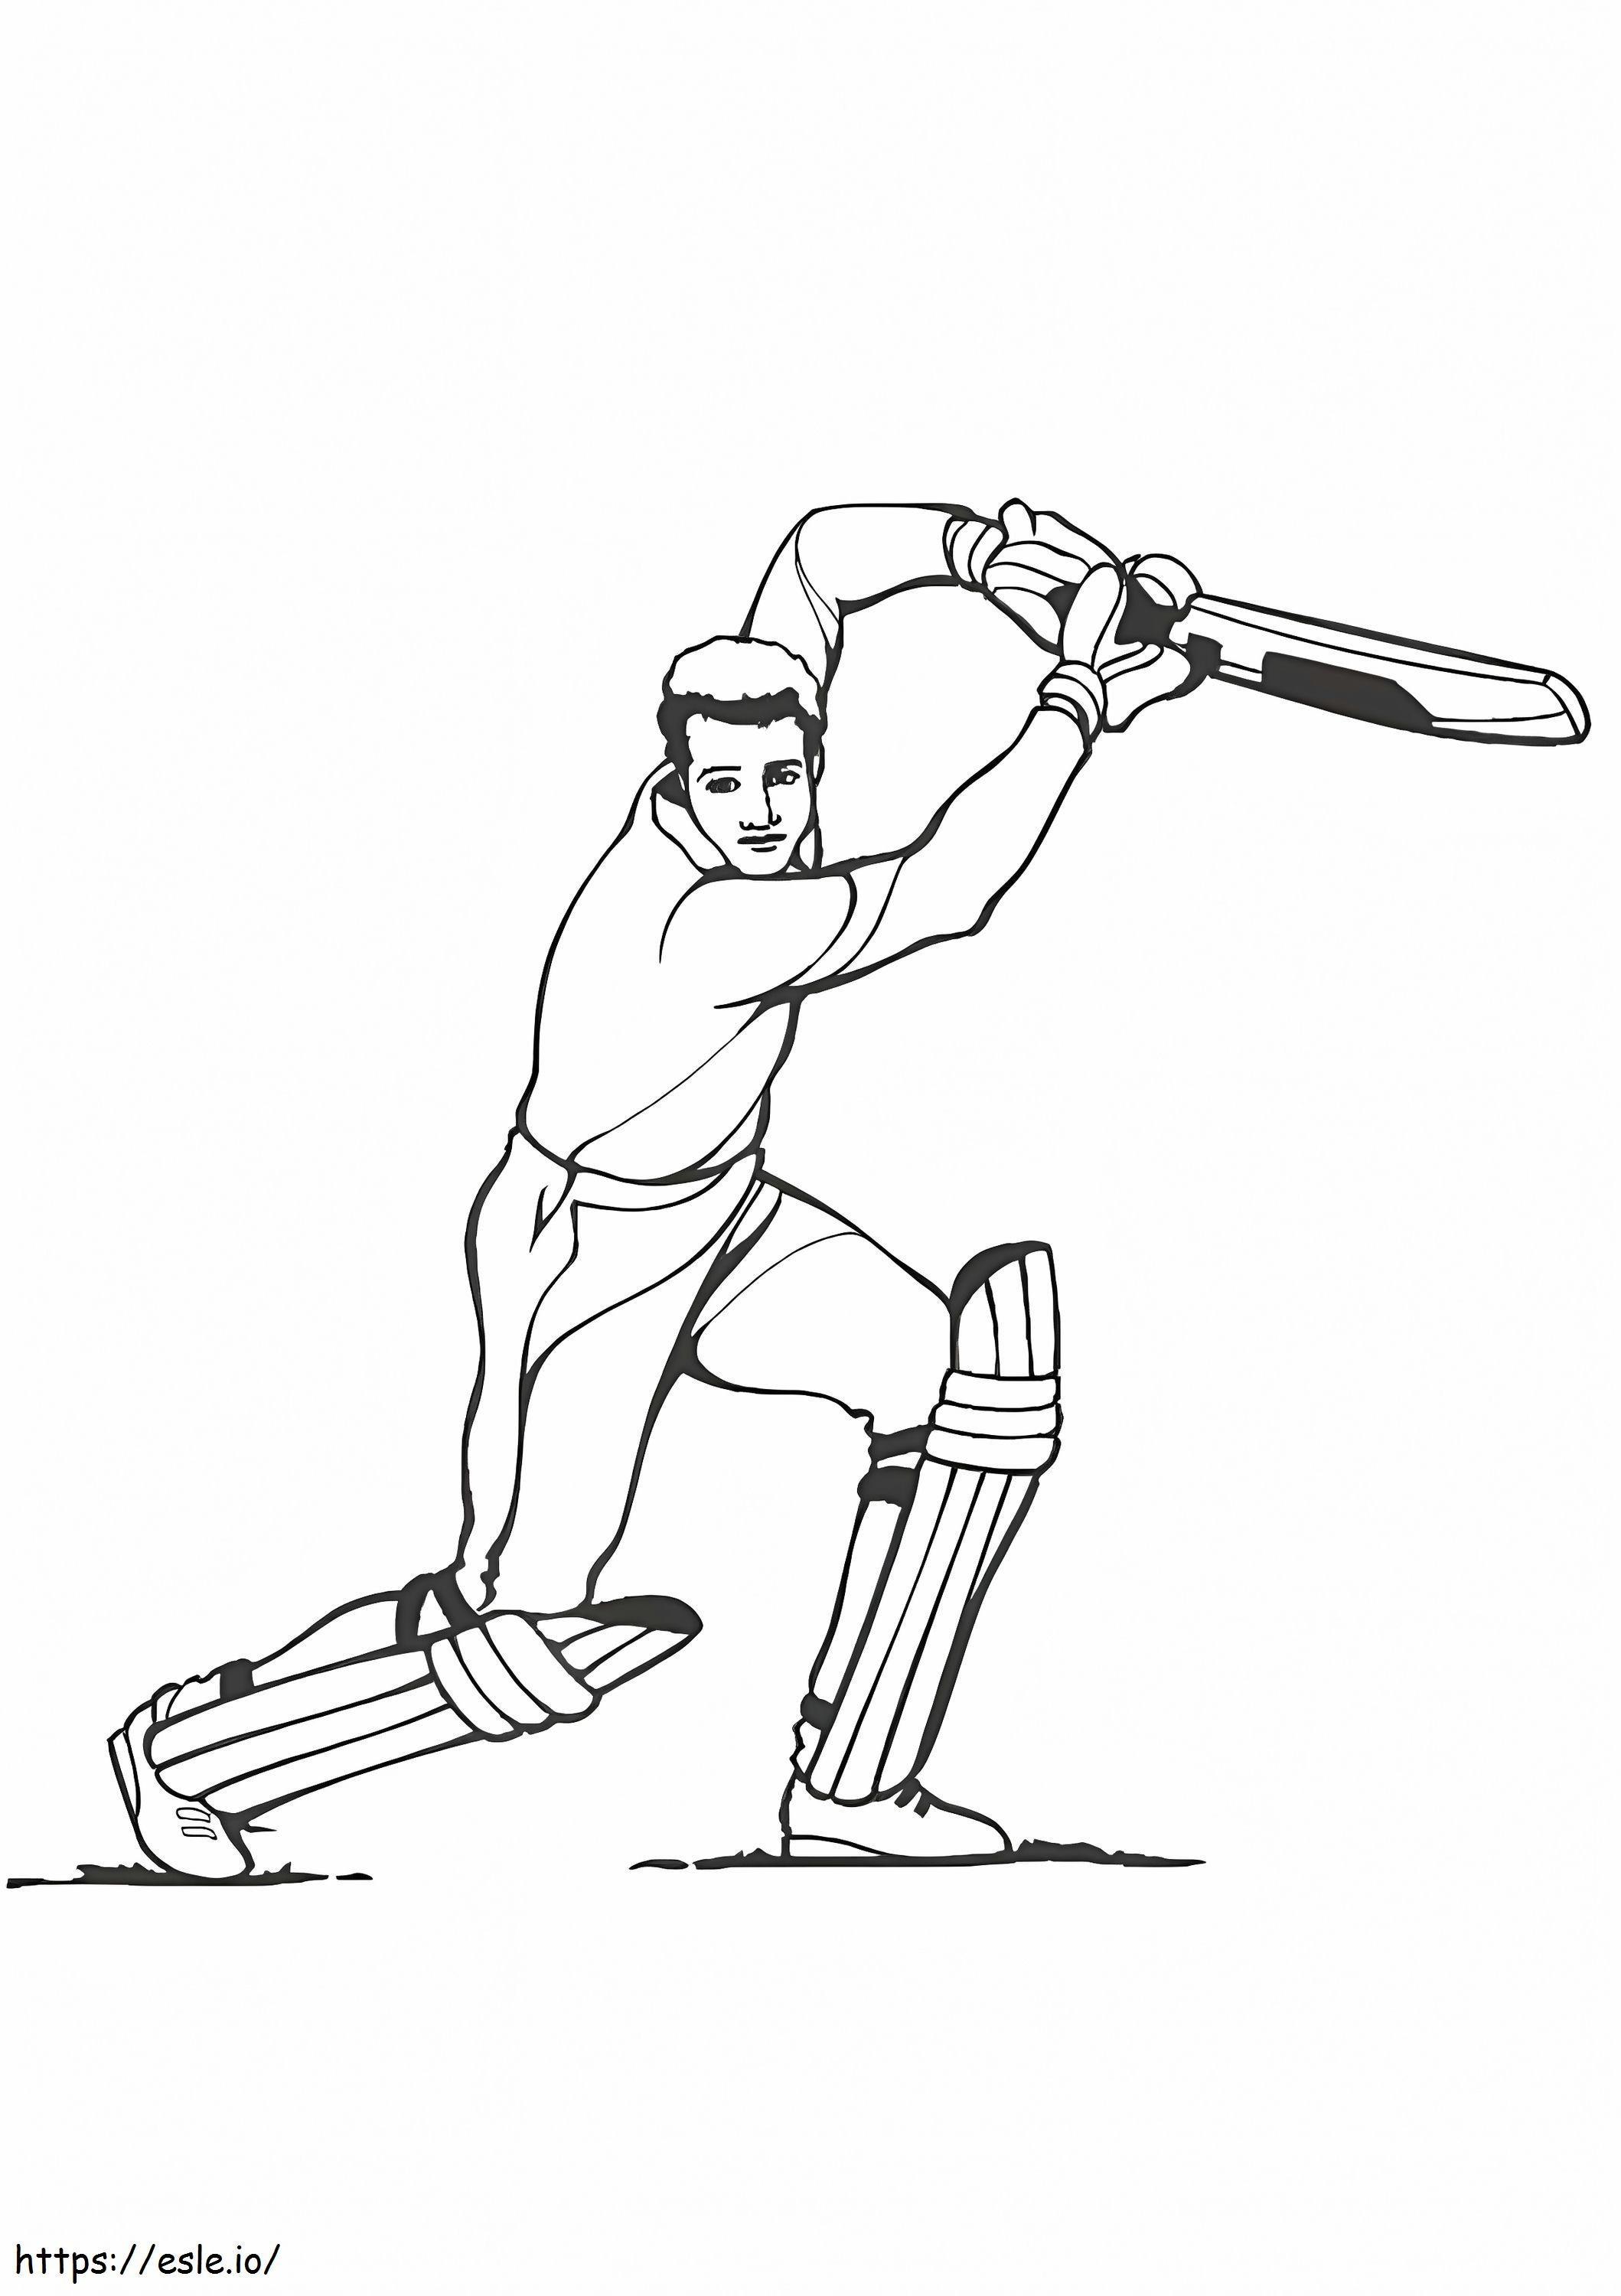 Cool Boy Playing Cricket coloring page